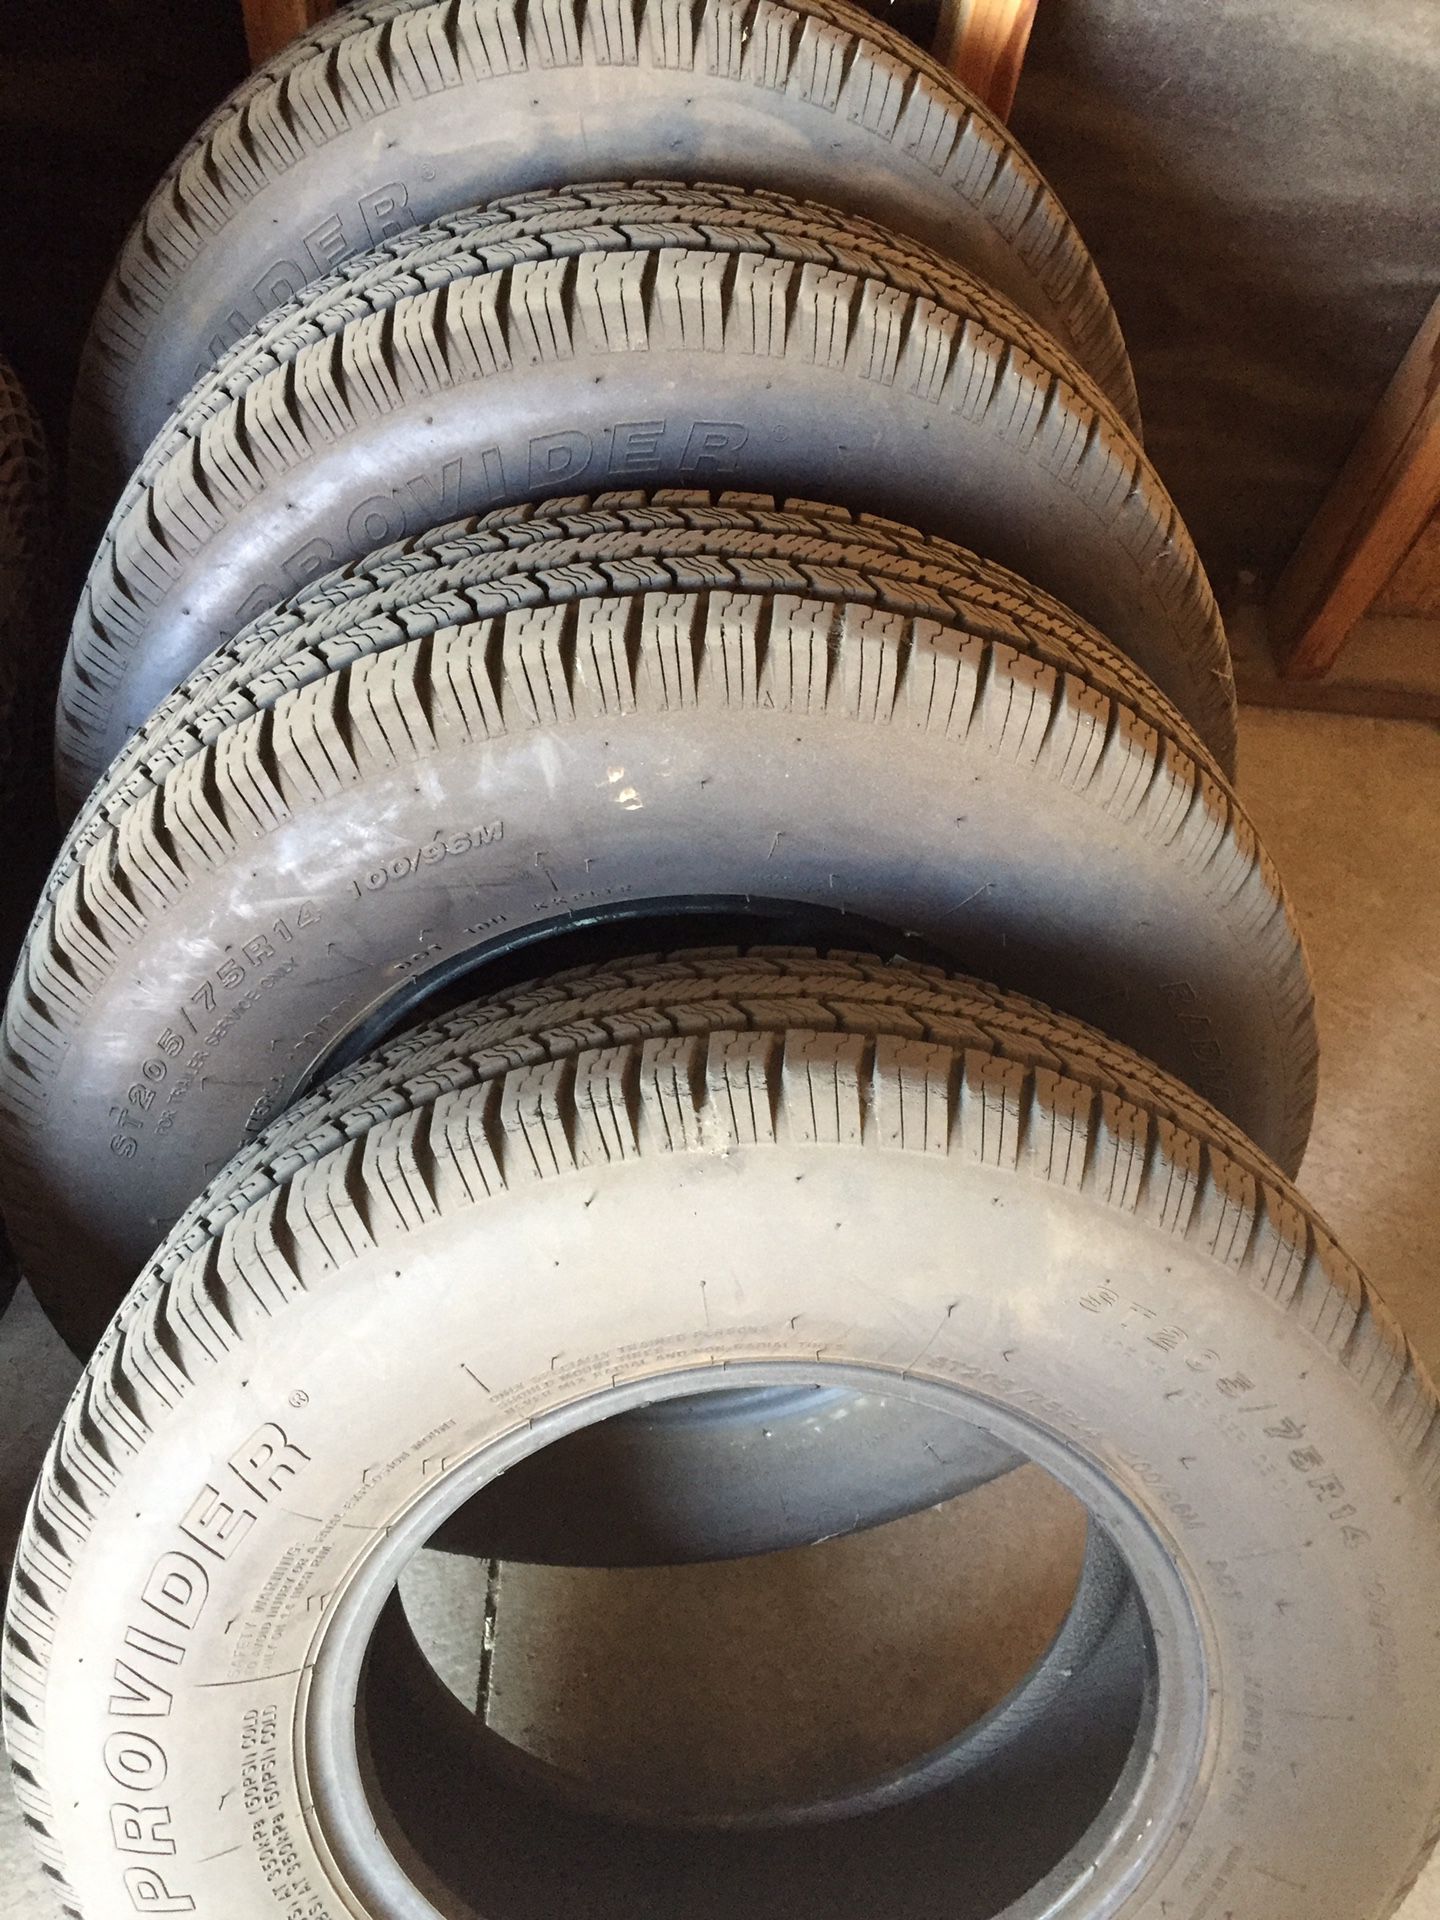 Used trailer tires 14”($40 each) $160 for 4 tires